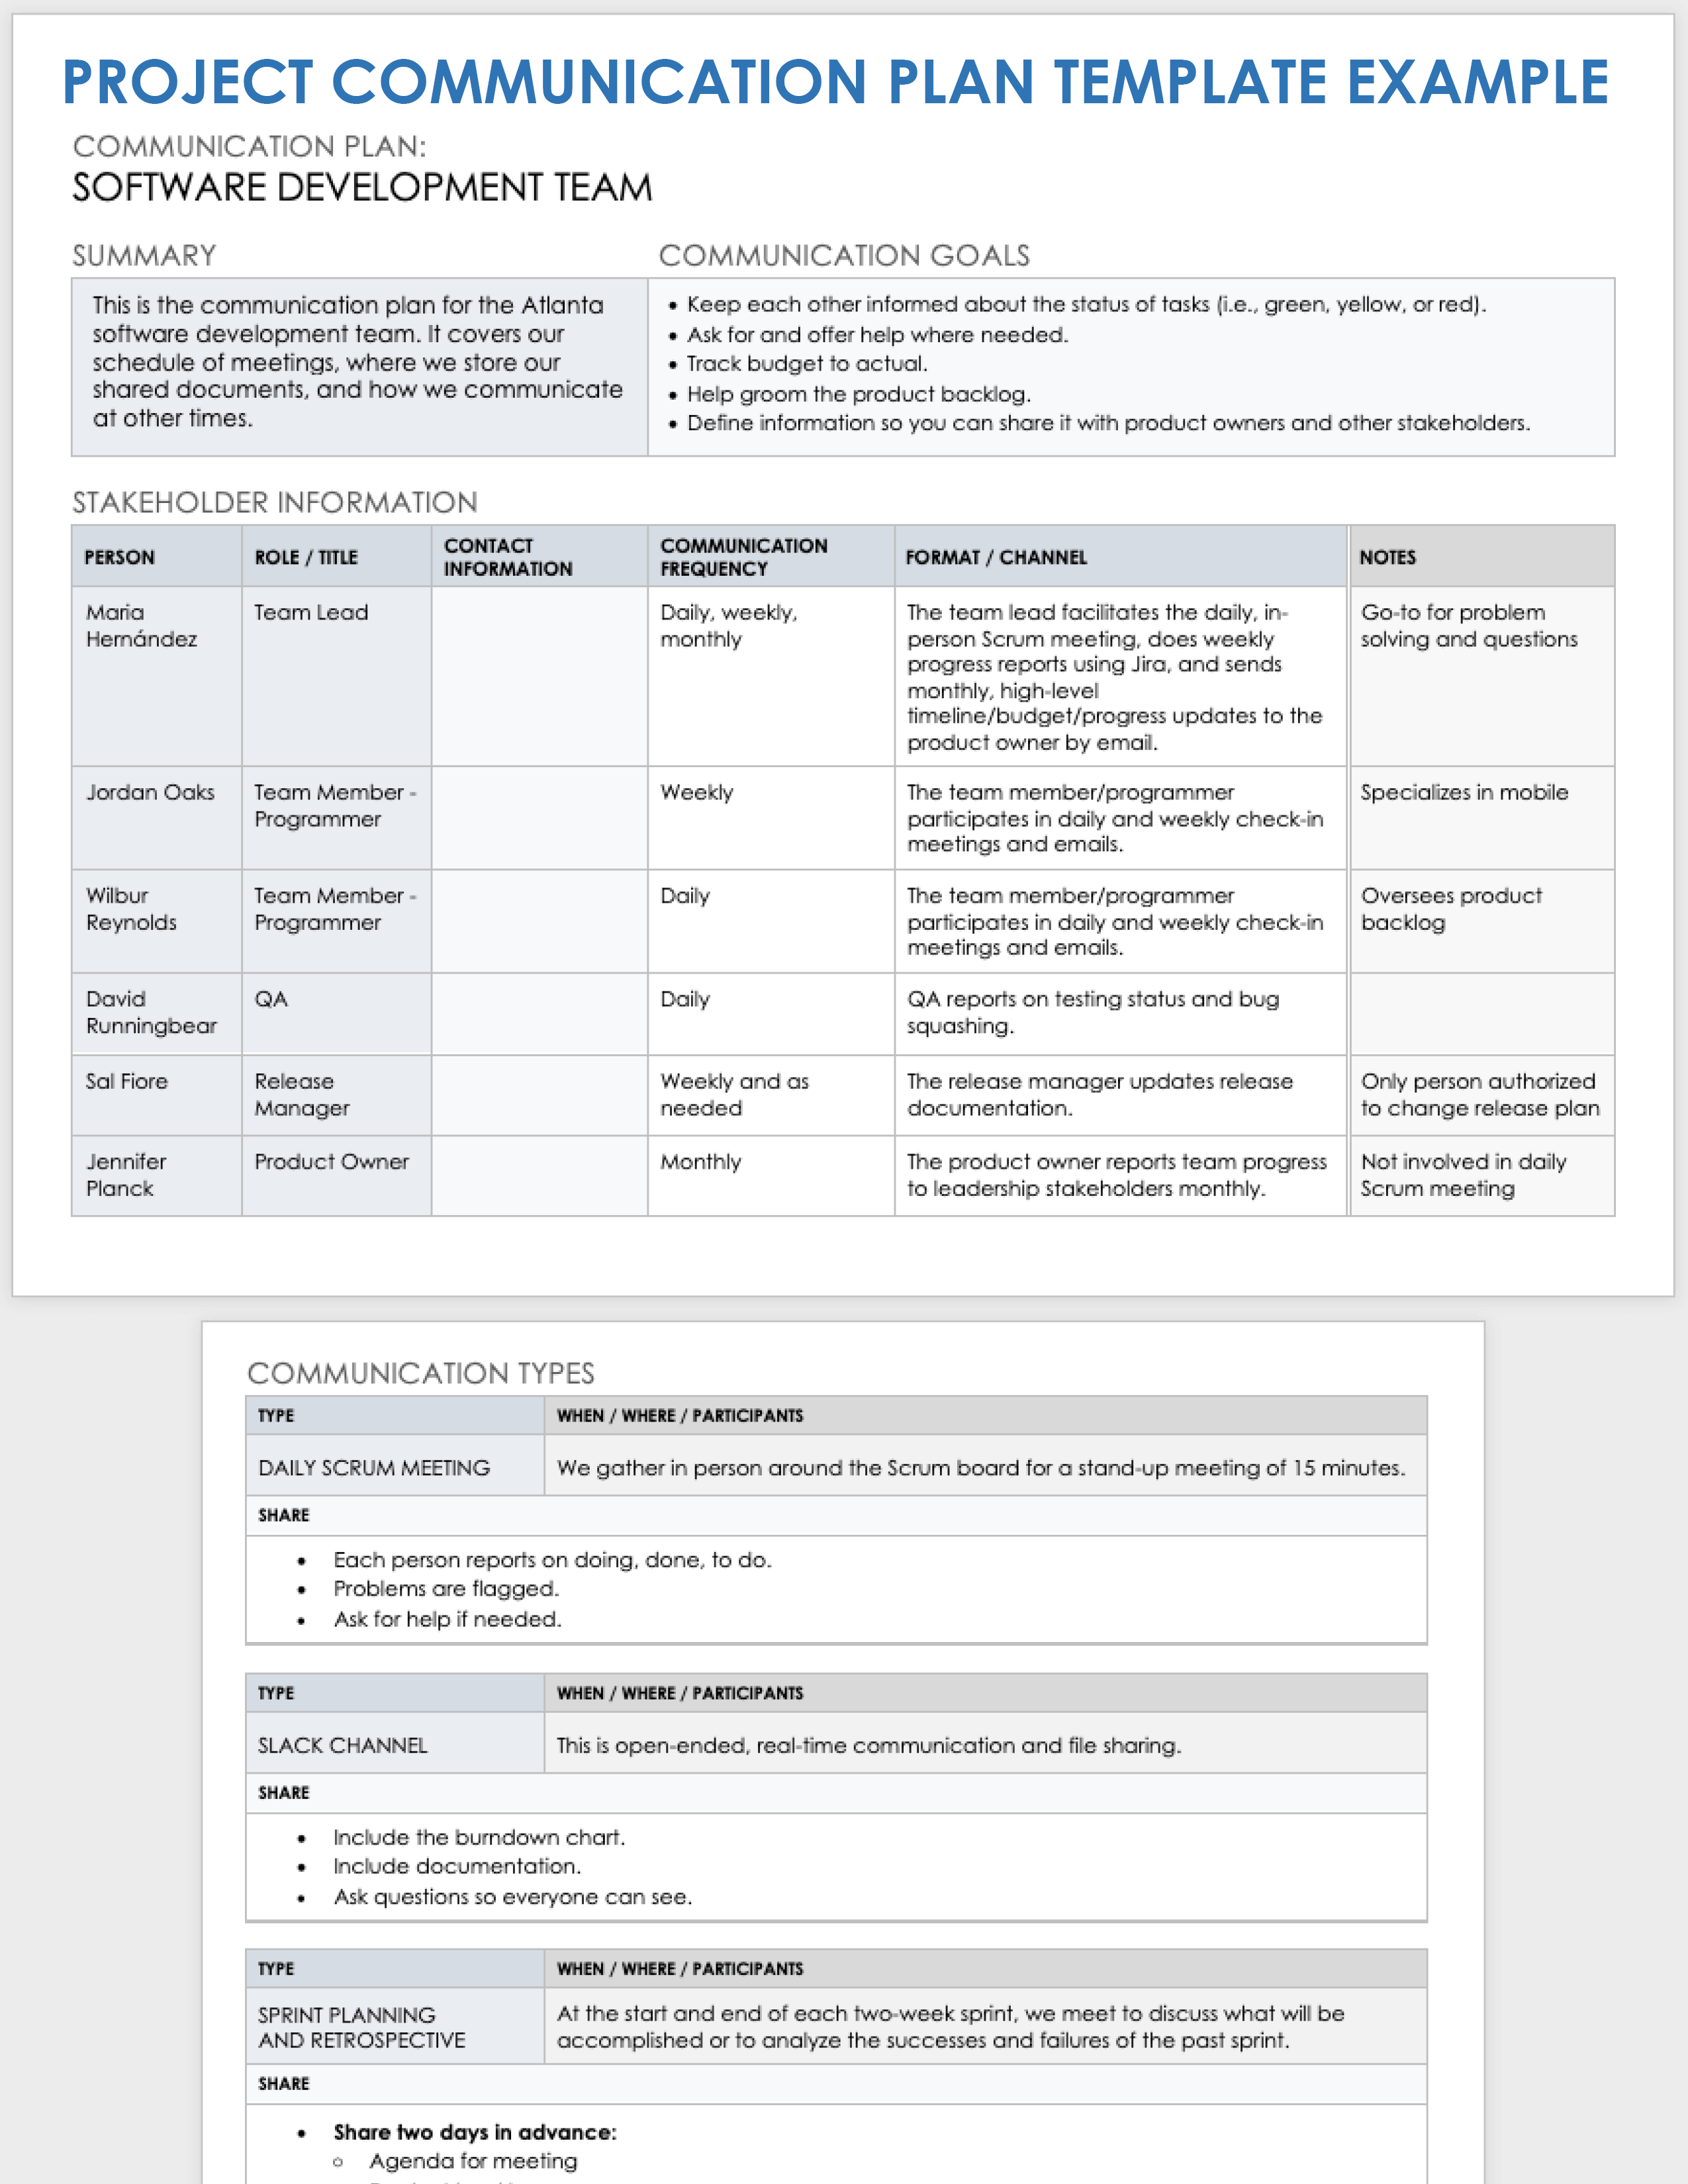 Project Communication Plan Example Template